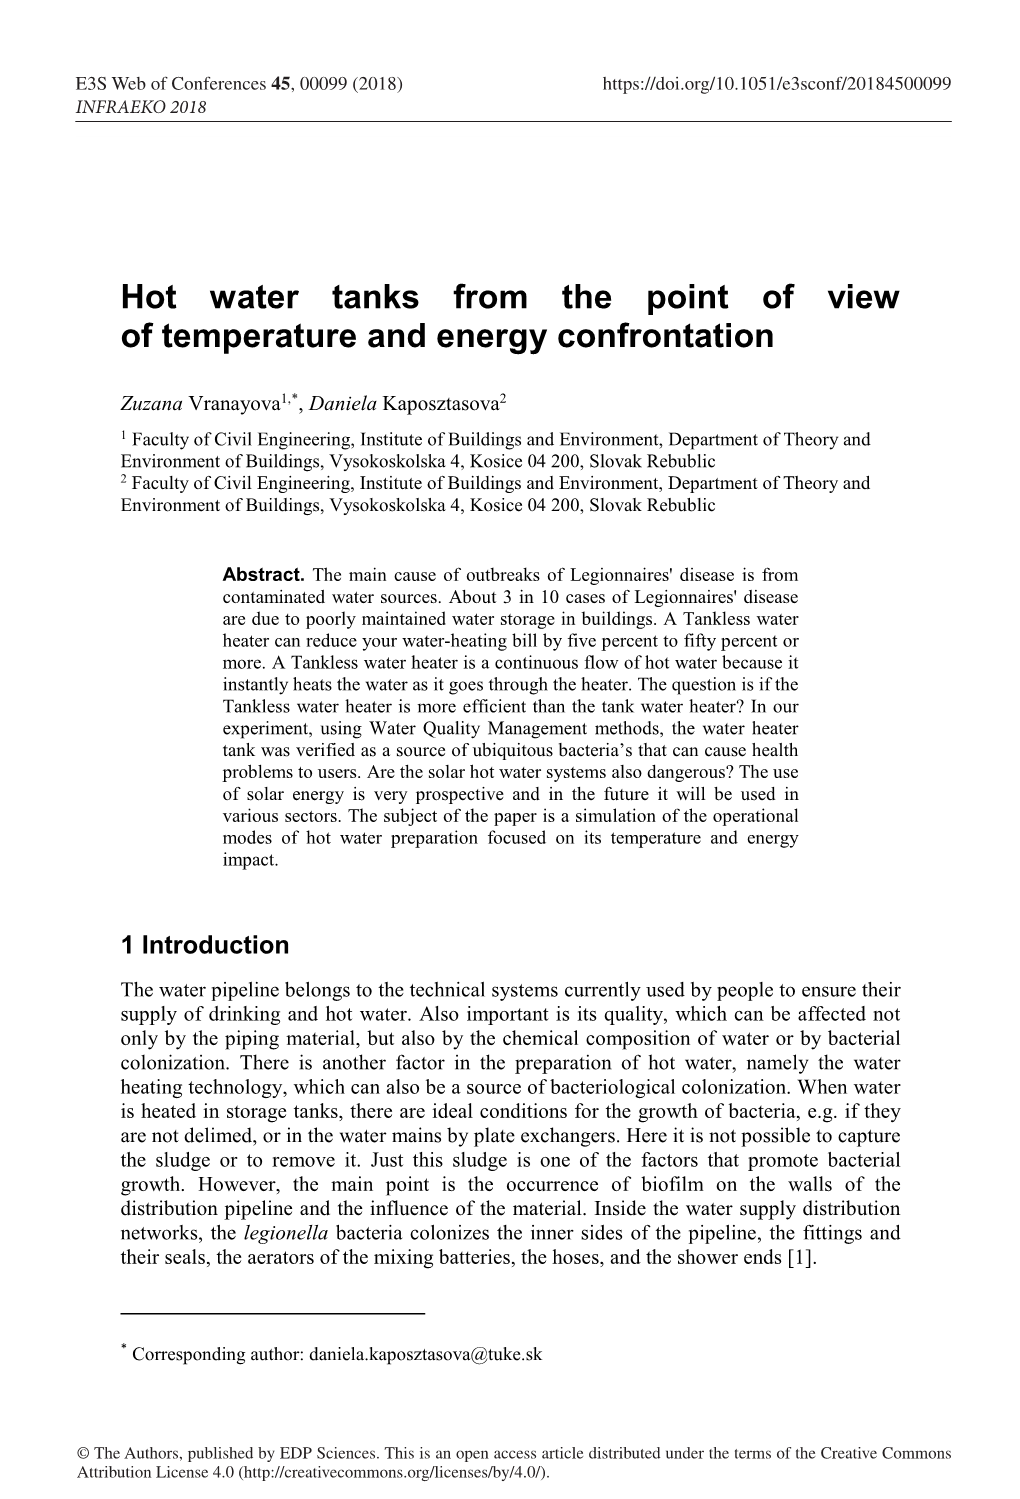 Hot Water Tanks from the Point of View of Temperature and Energy Confrontation